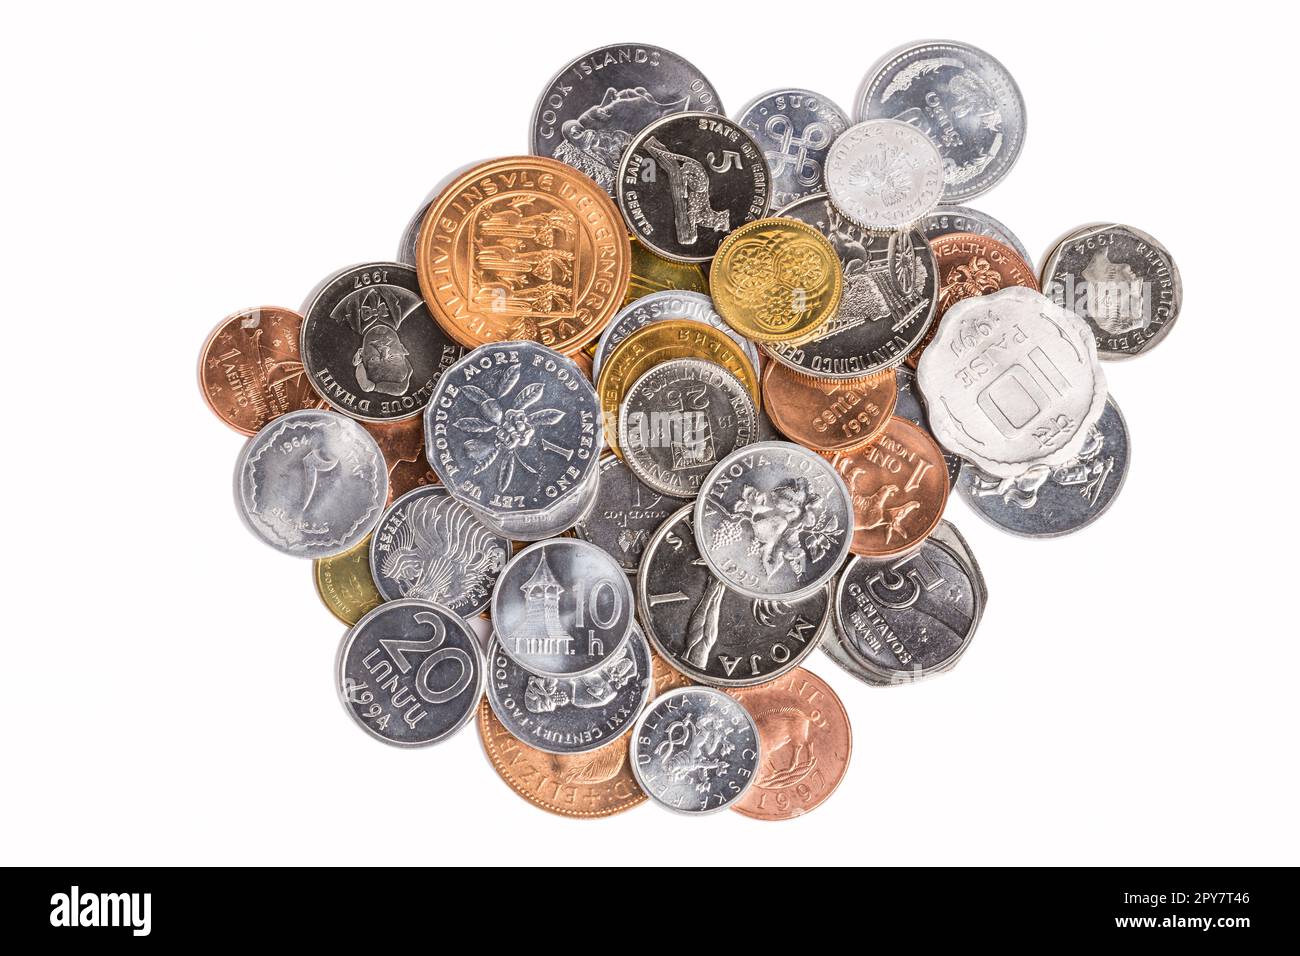 A Collection of Coins Money From Around The World Stock Photo